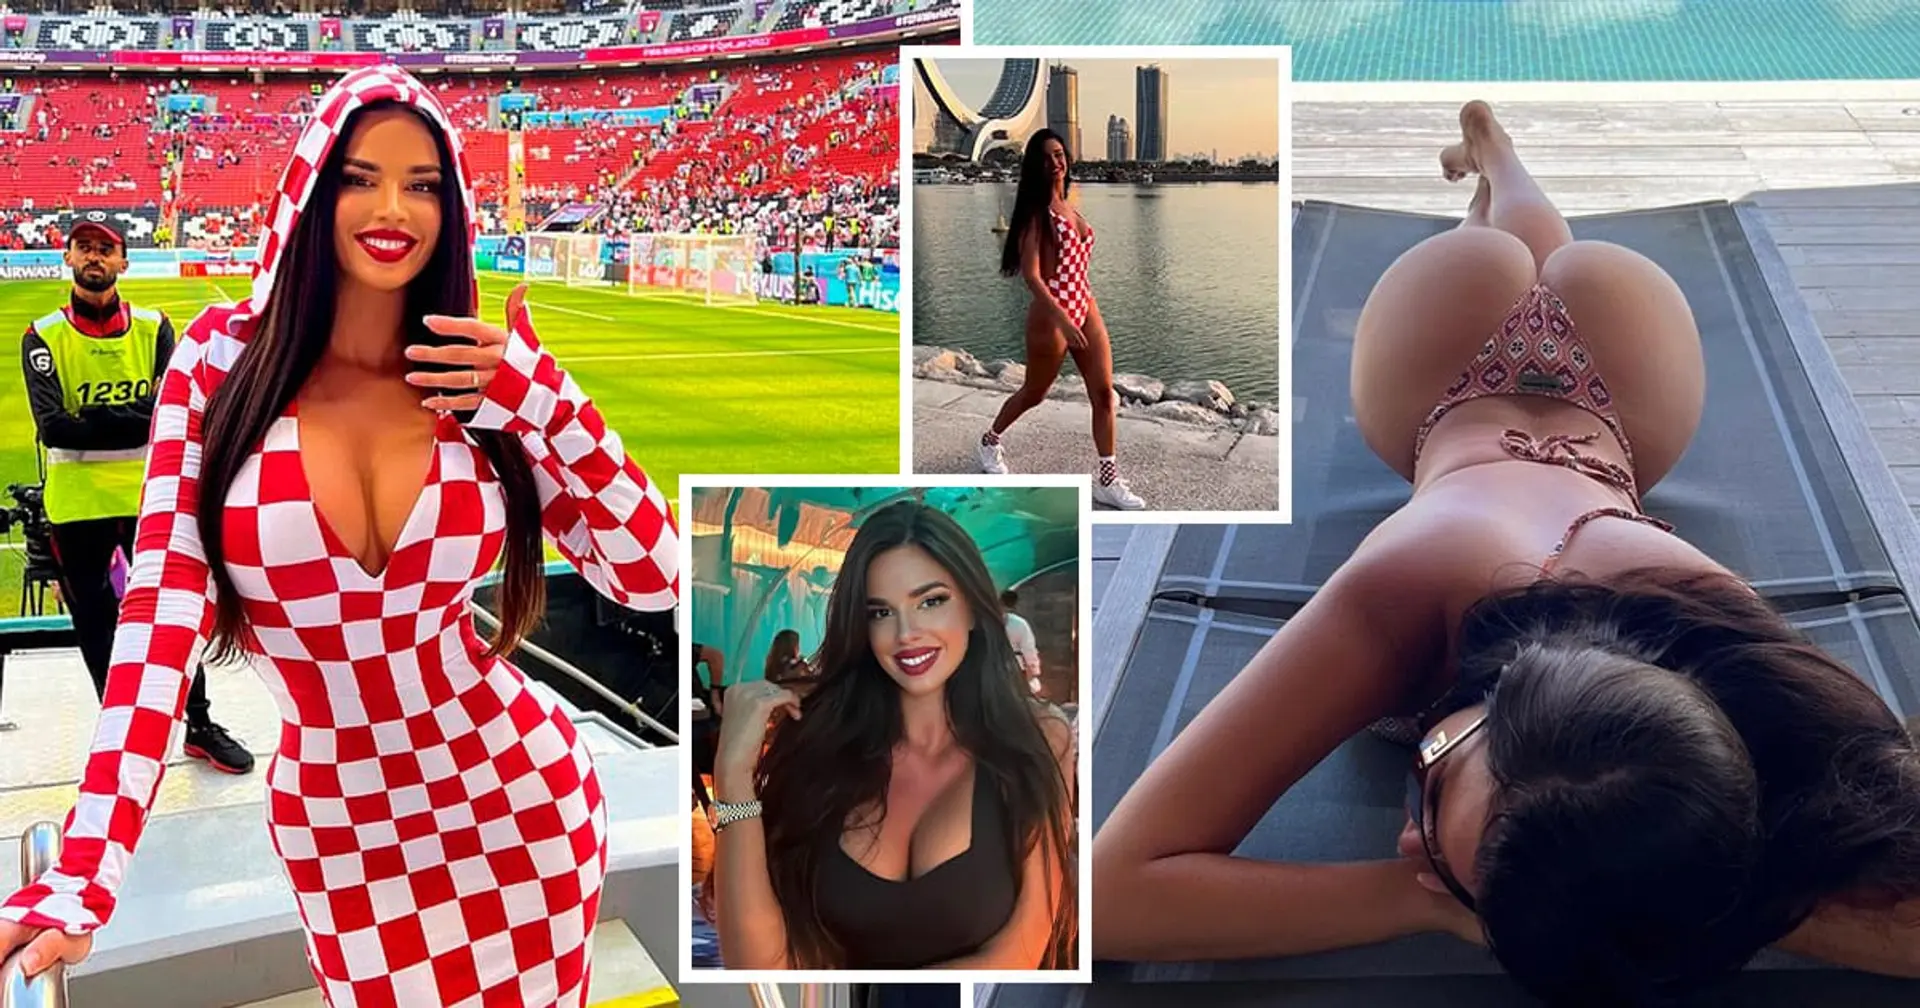 Croatia fan Ivana Knoll tests Qatar clothing laws with her controversial outfit 